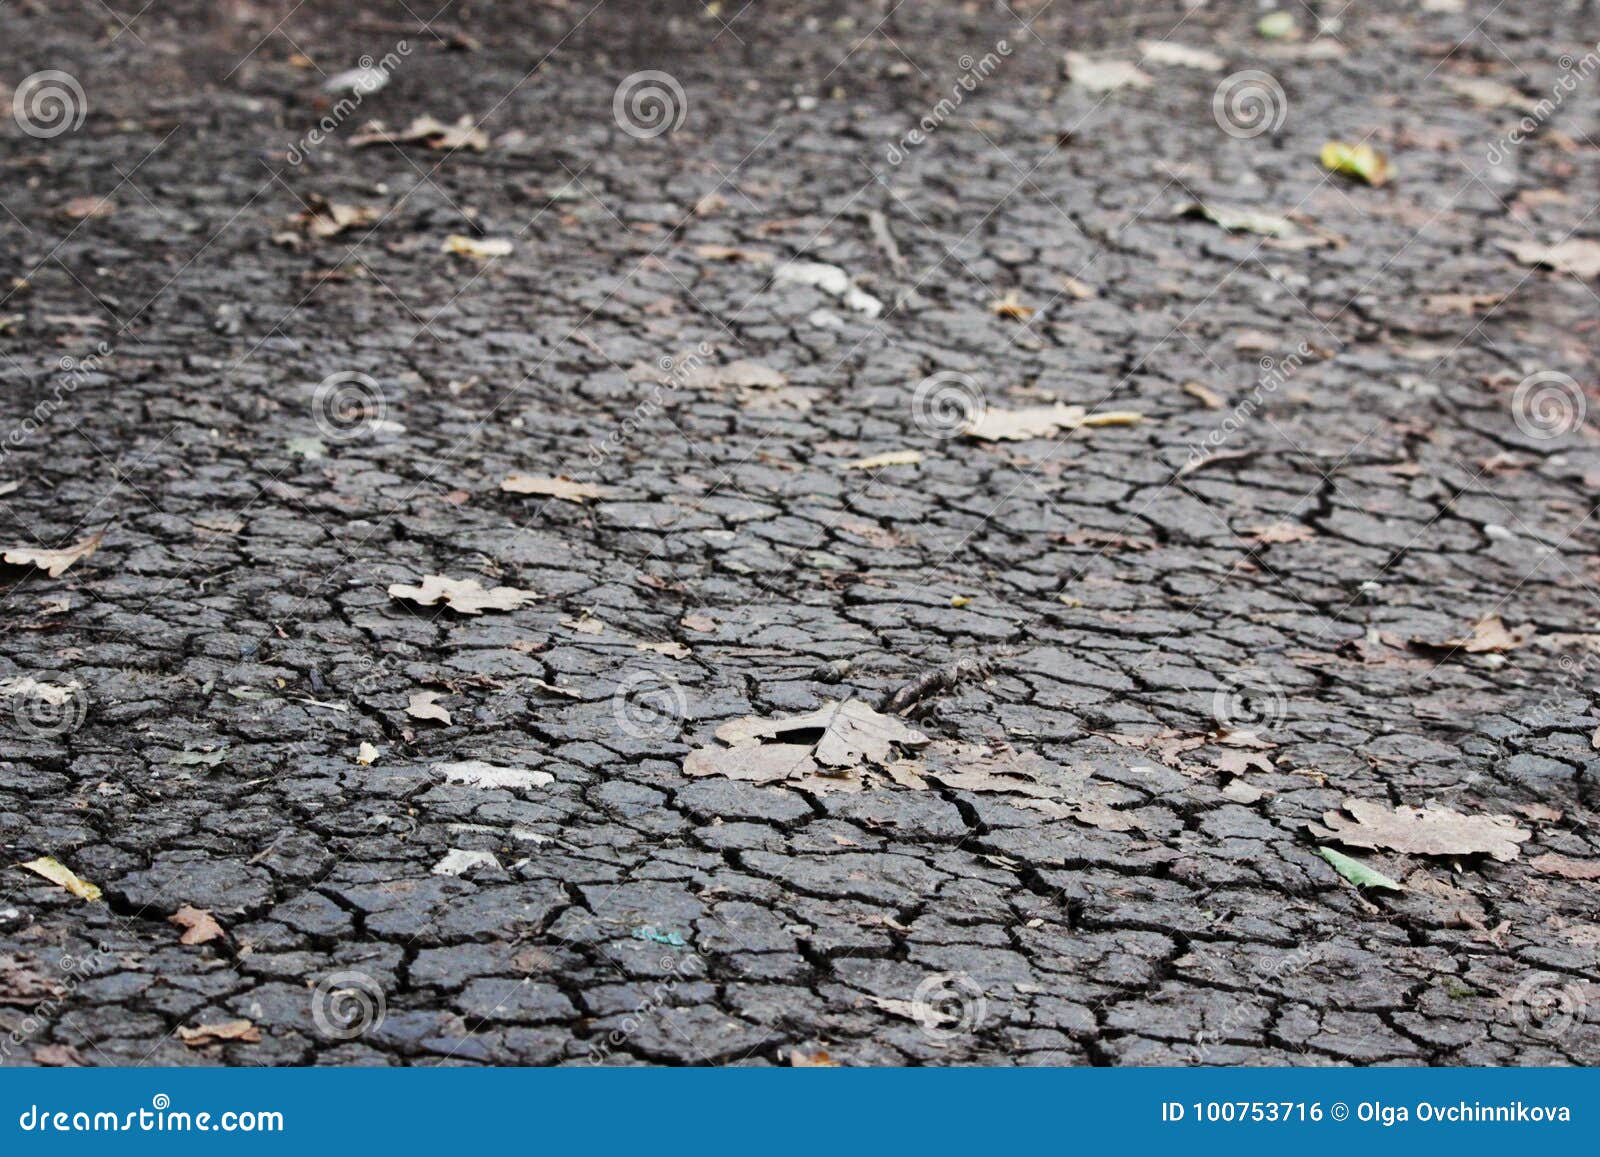 Dry Black Soil With Leaves From Trees In The Forest During A Hot Dry